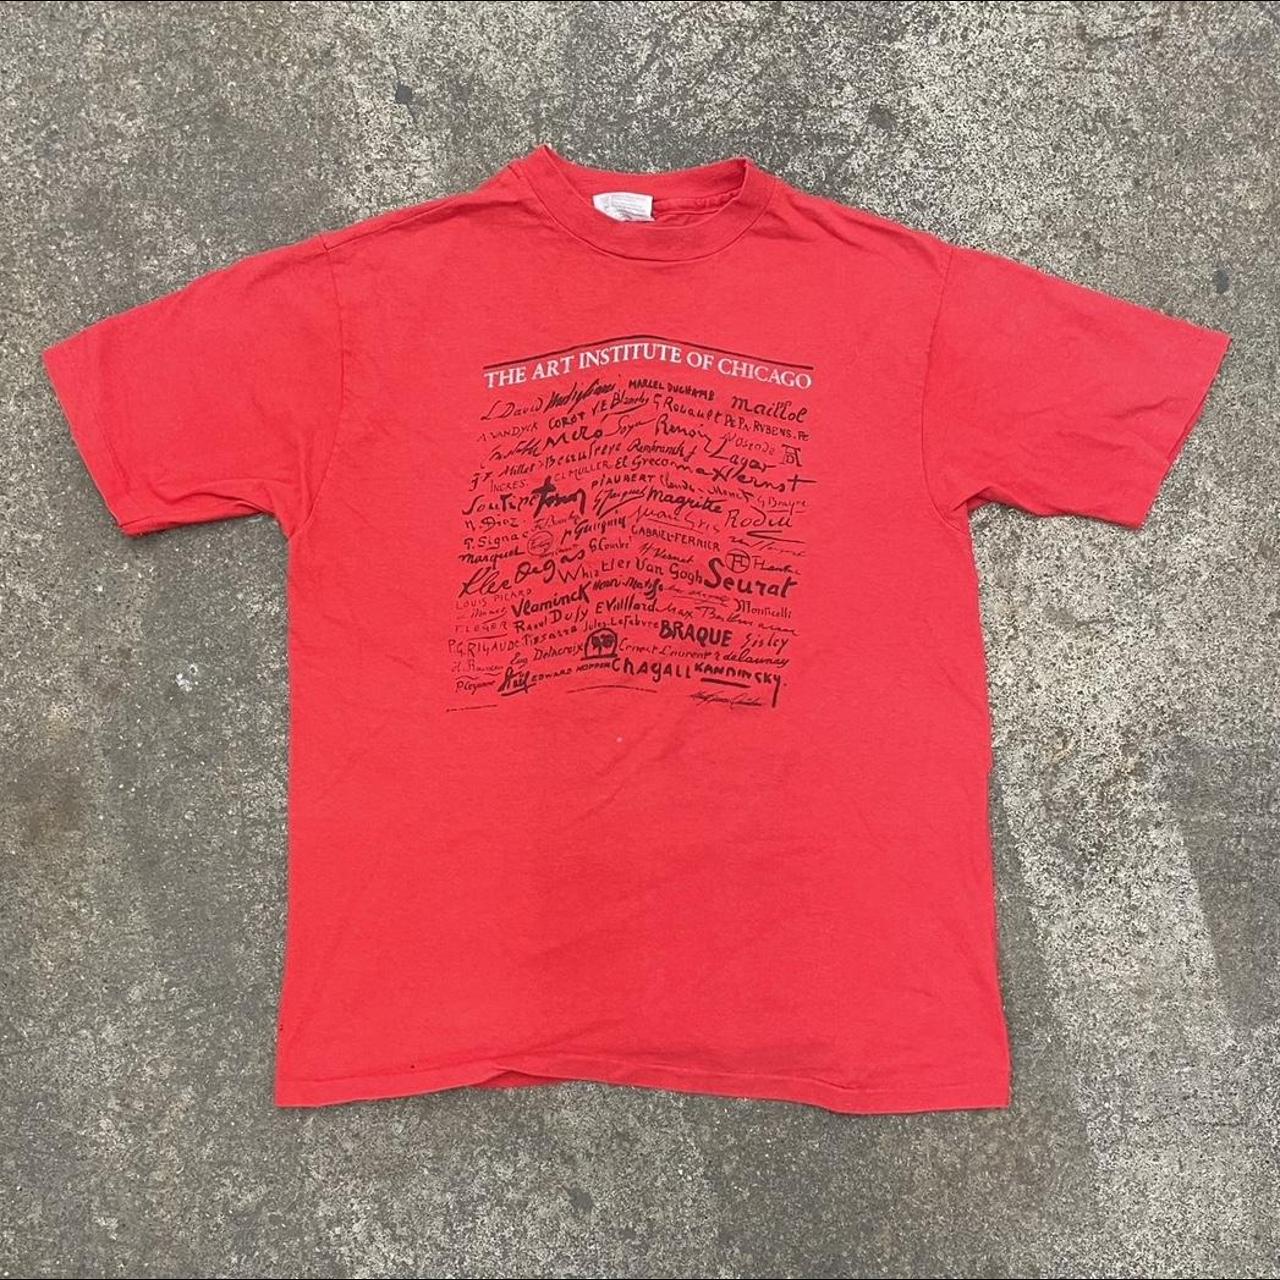 Vintage art institute of Chicago tee, Tagged L, Pits:...